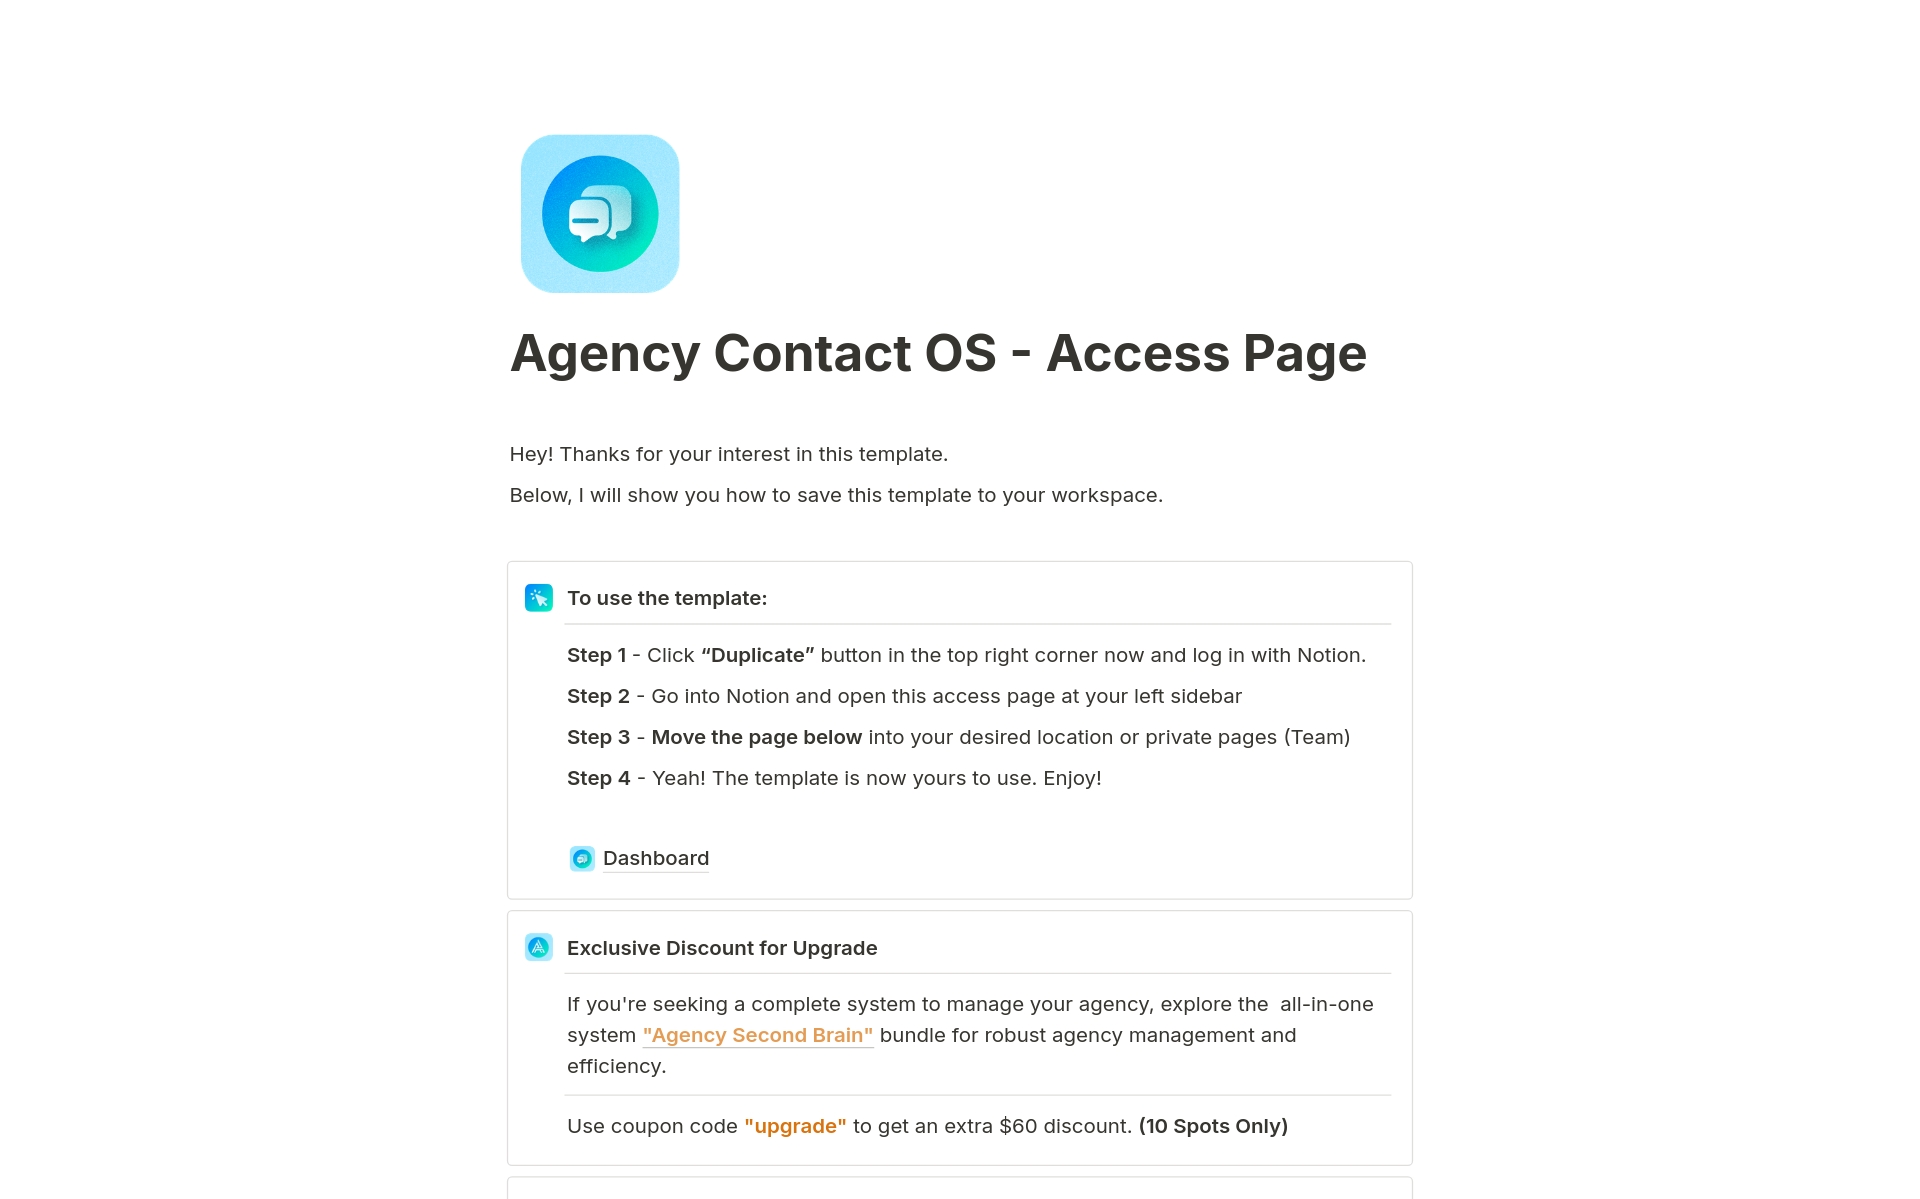 Turn your agency's network into a revenue generator with Agency Contact OS, mastering the art of converting contacts to clients.